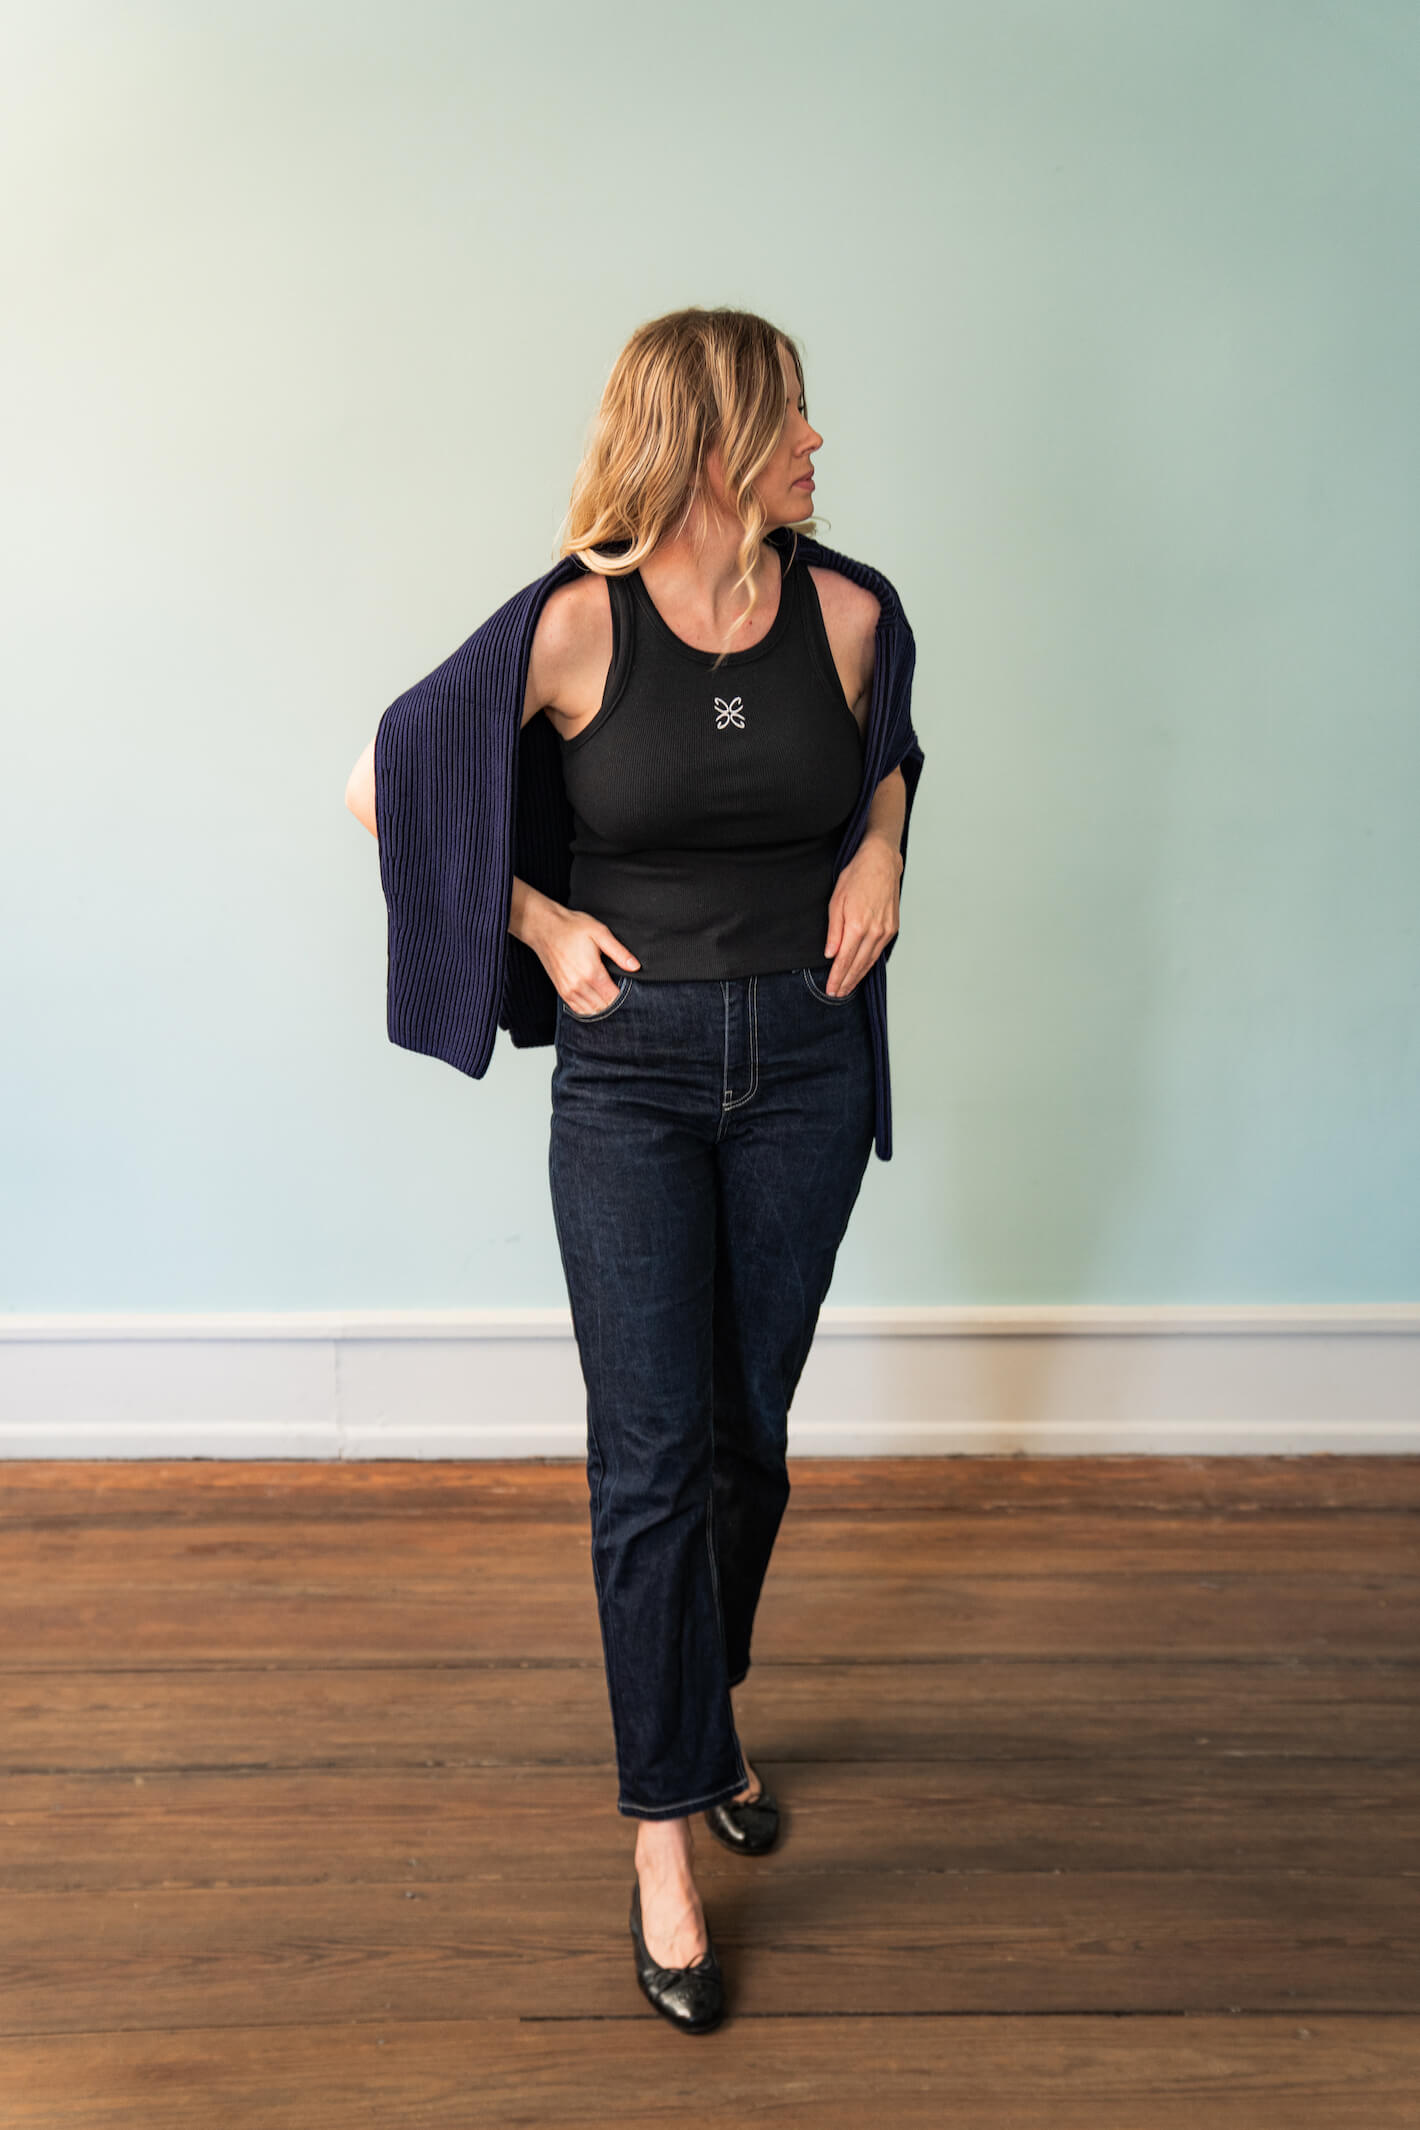 Woman modeling Cyme Copenhagen's spring/summer 2024 collection. She wears a black tank top with a white logo, dark denim jeans, and black ballet flats. A dark blue cardigan is draped over her shoulders. The setting features a light teal wall and wooden floor, highlighting the casual yet stylish look of the collection.